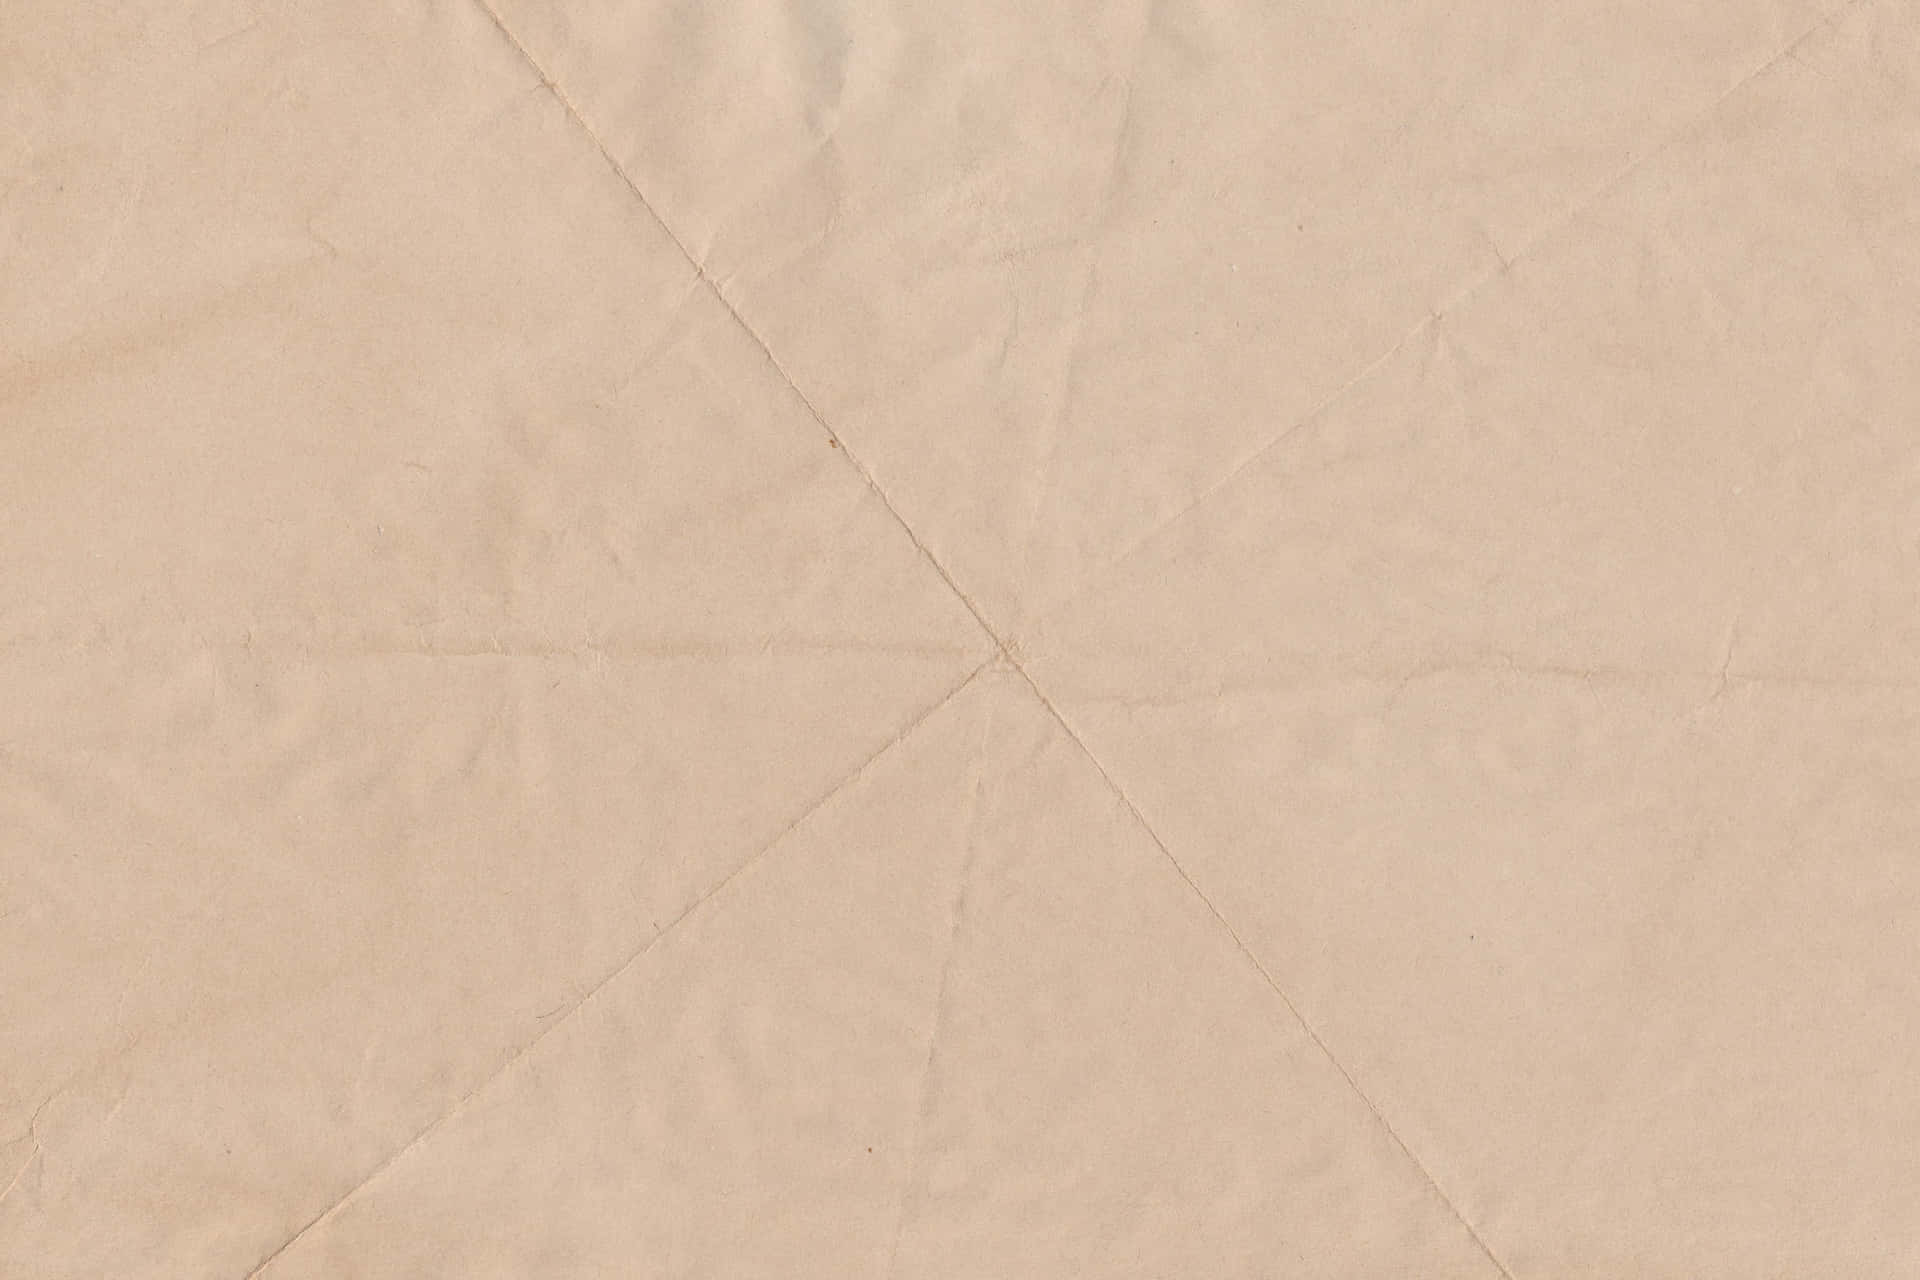 Parchment Background With Line Patterns